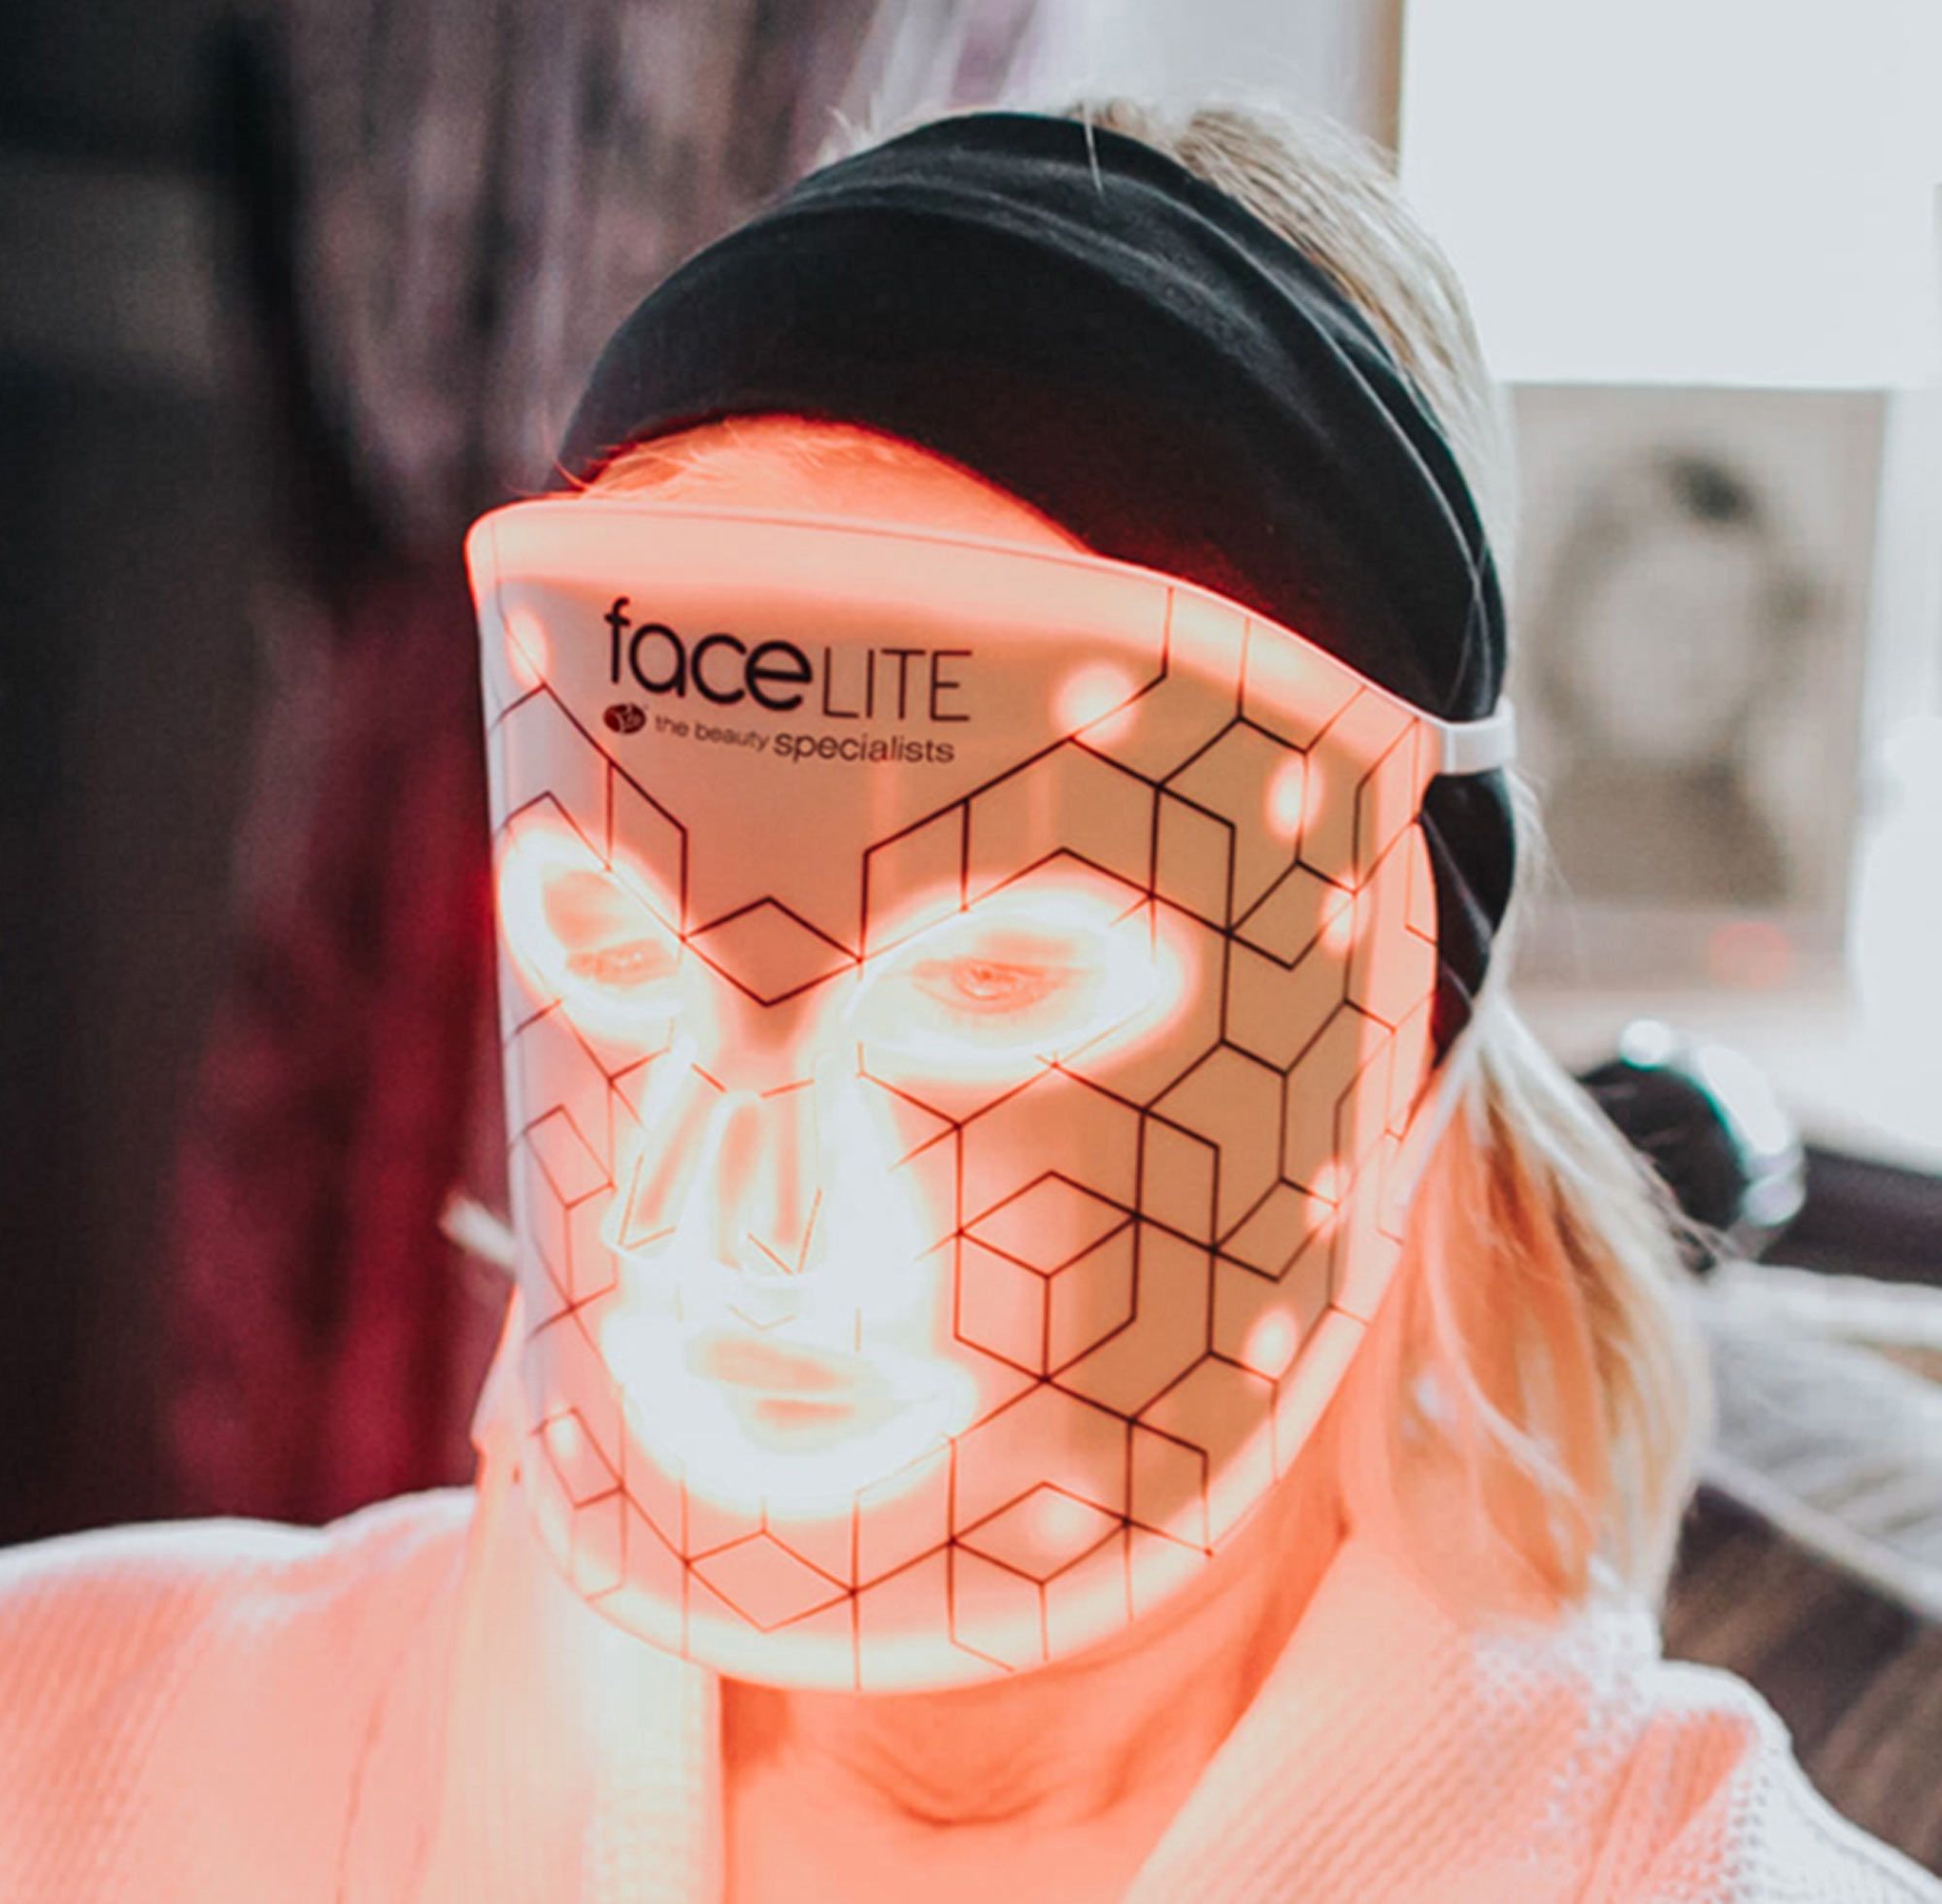 blonde lady relaxing wearing facelite beauty boosting LED face mask with red and infrared lights illuminated 